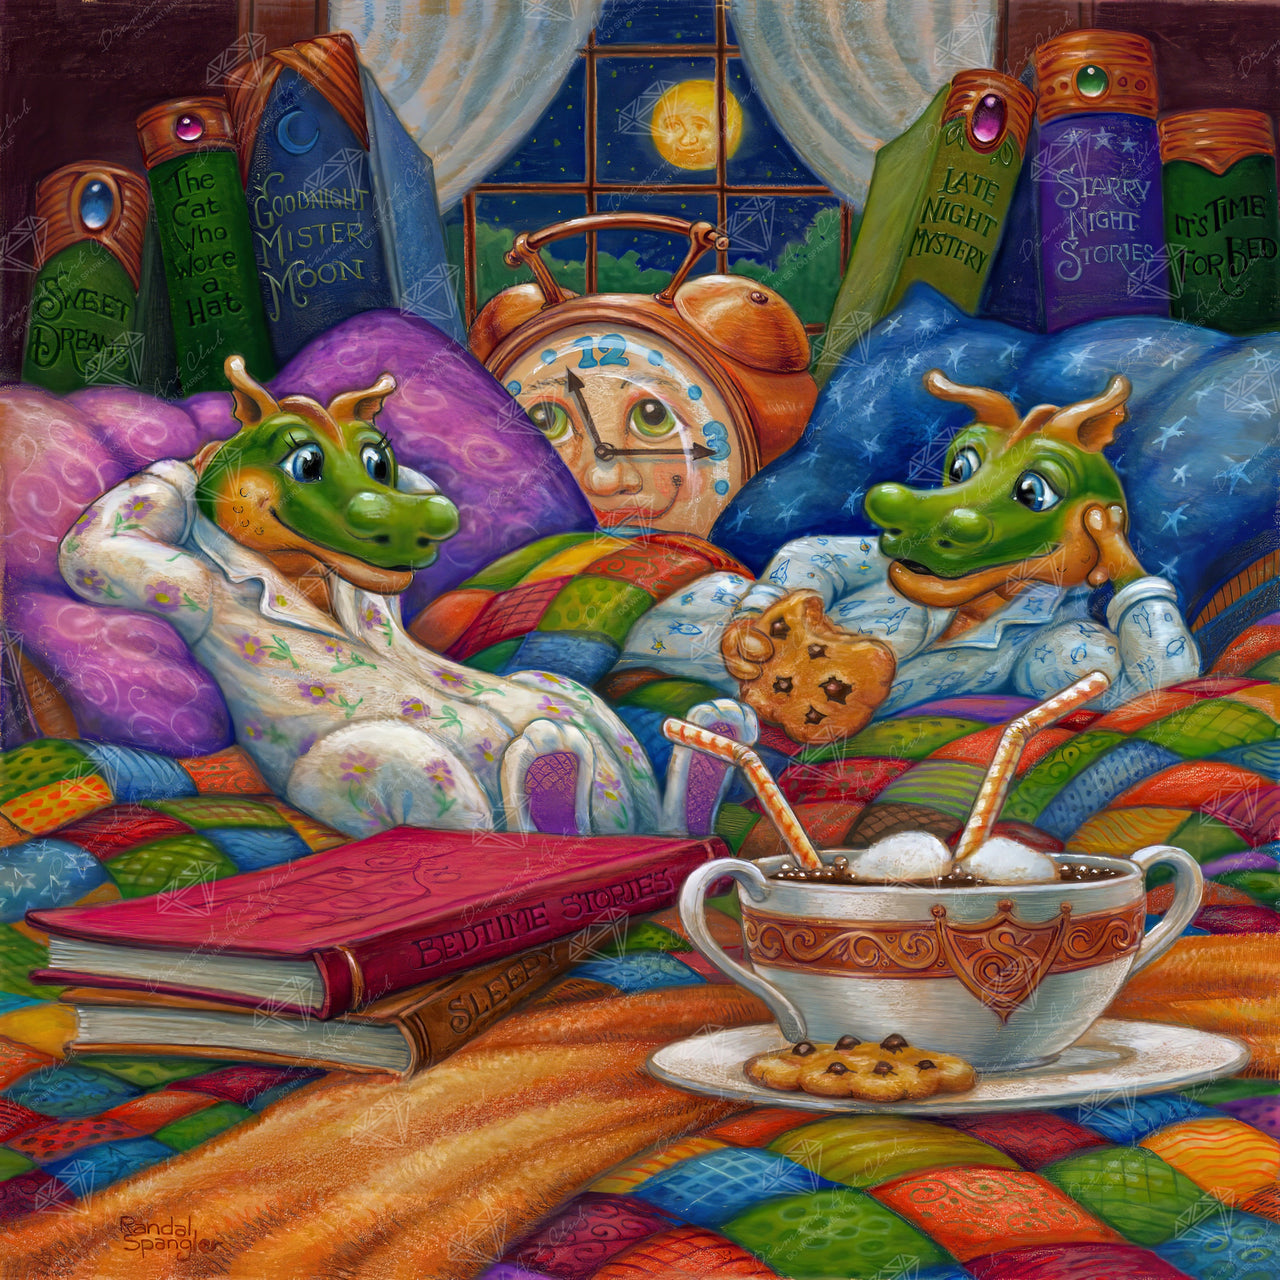 Diamond Painting Pajama Time 25.6" x 25.6" (65cm x 65cm) / Square with 66 Colors including 5 ABs / 68,120